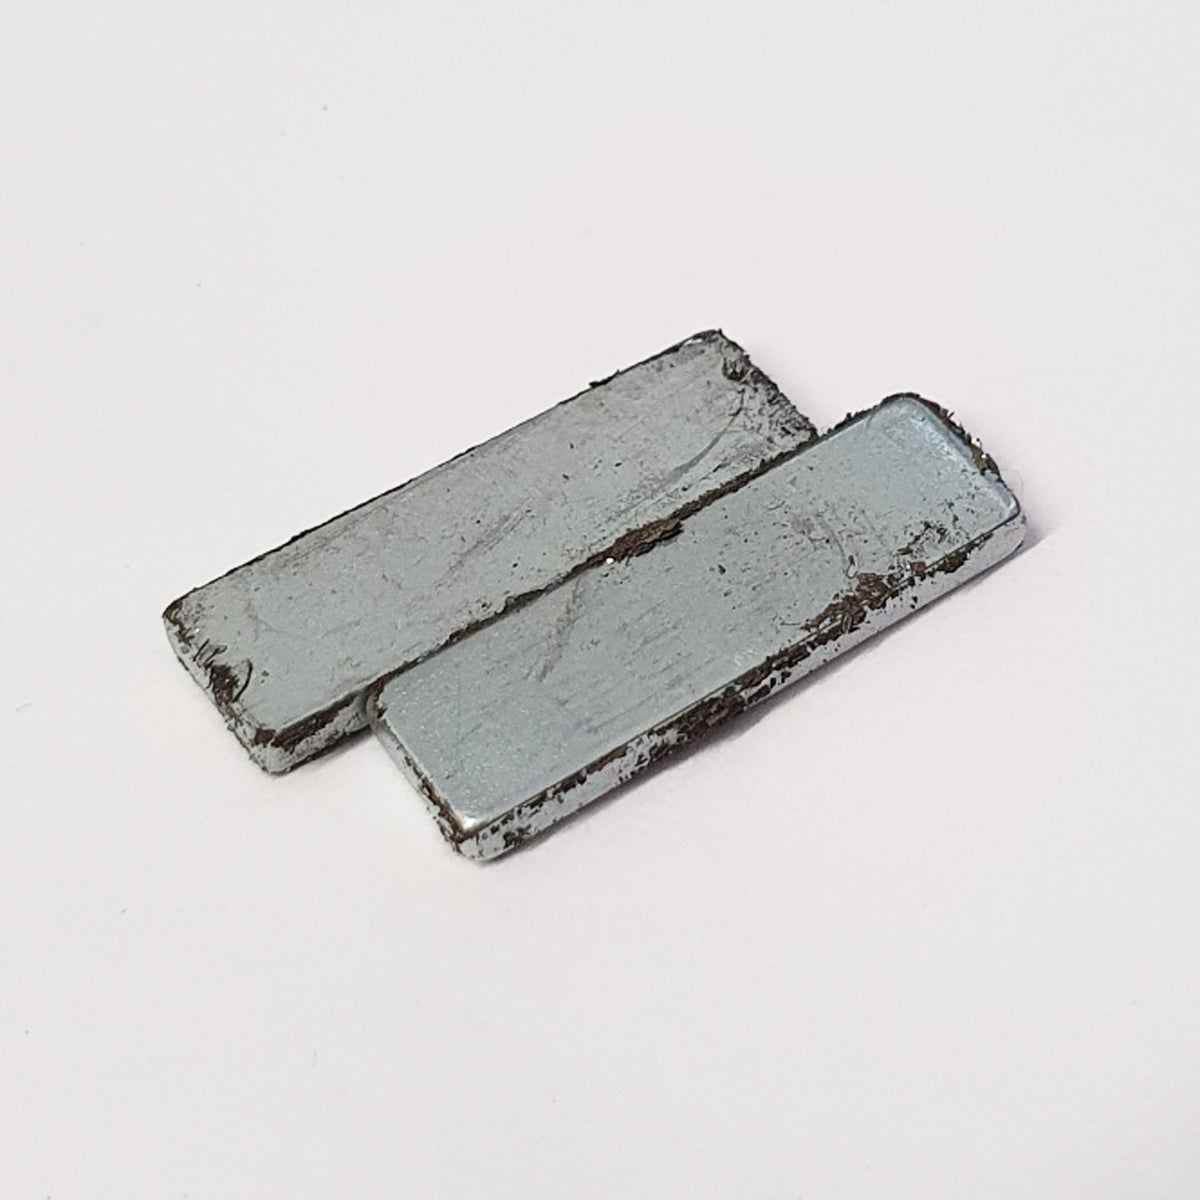 Scalextric Pair Of Magnets - 20mm x 6mm x 1mm #E